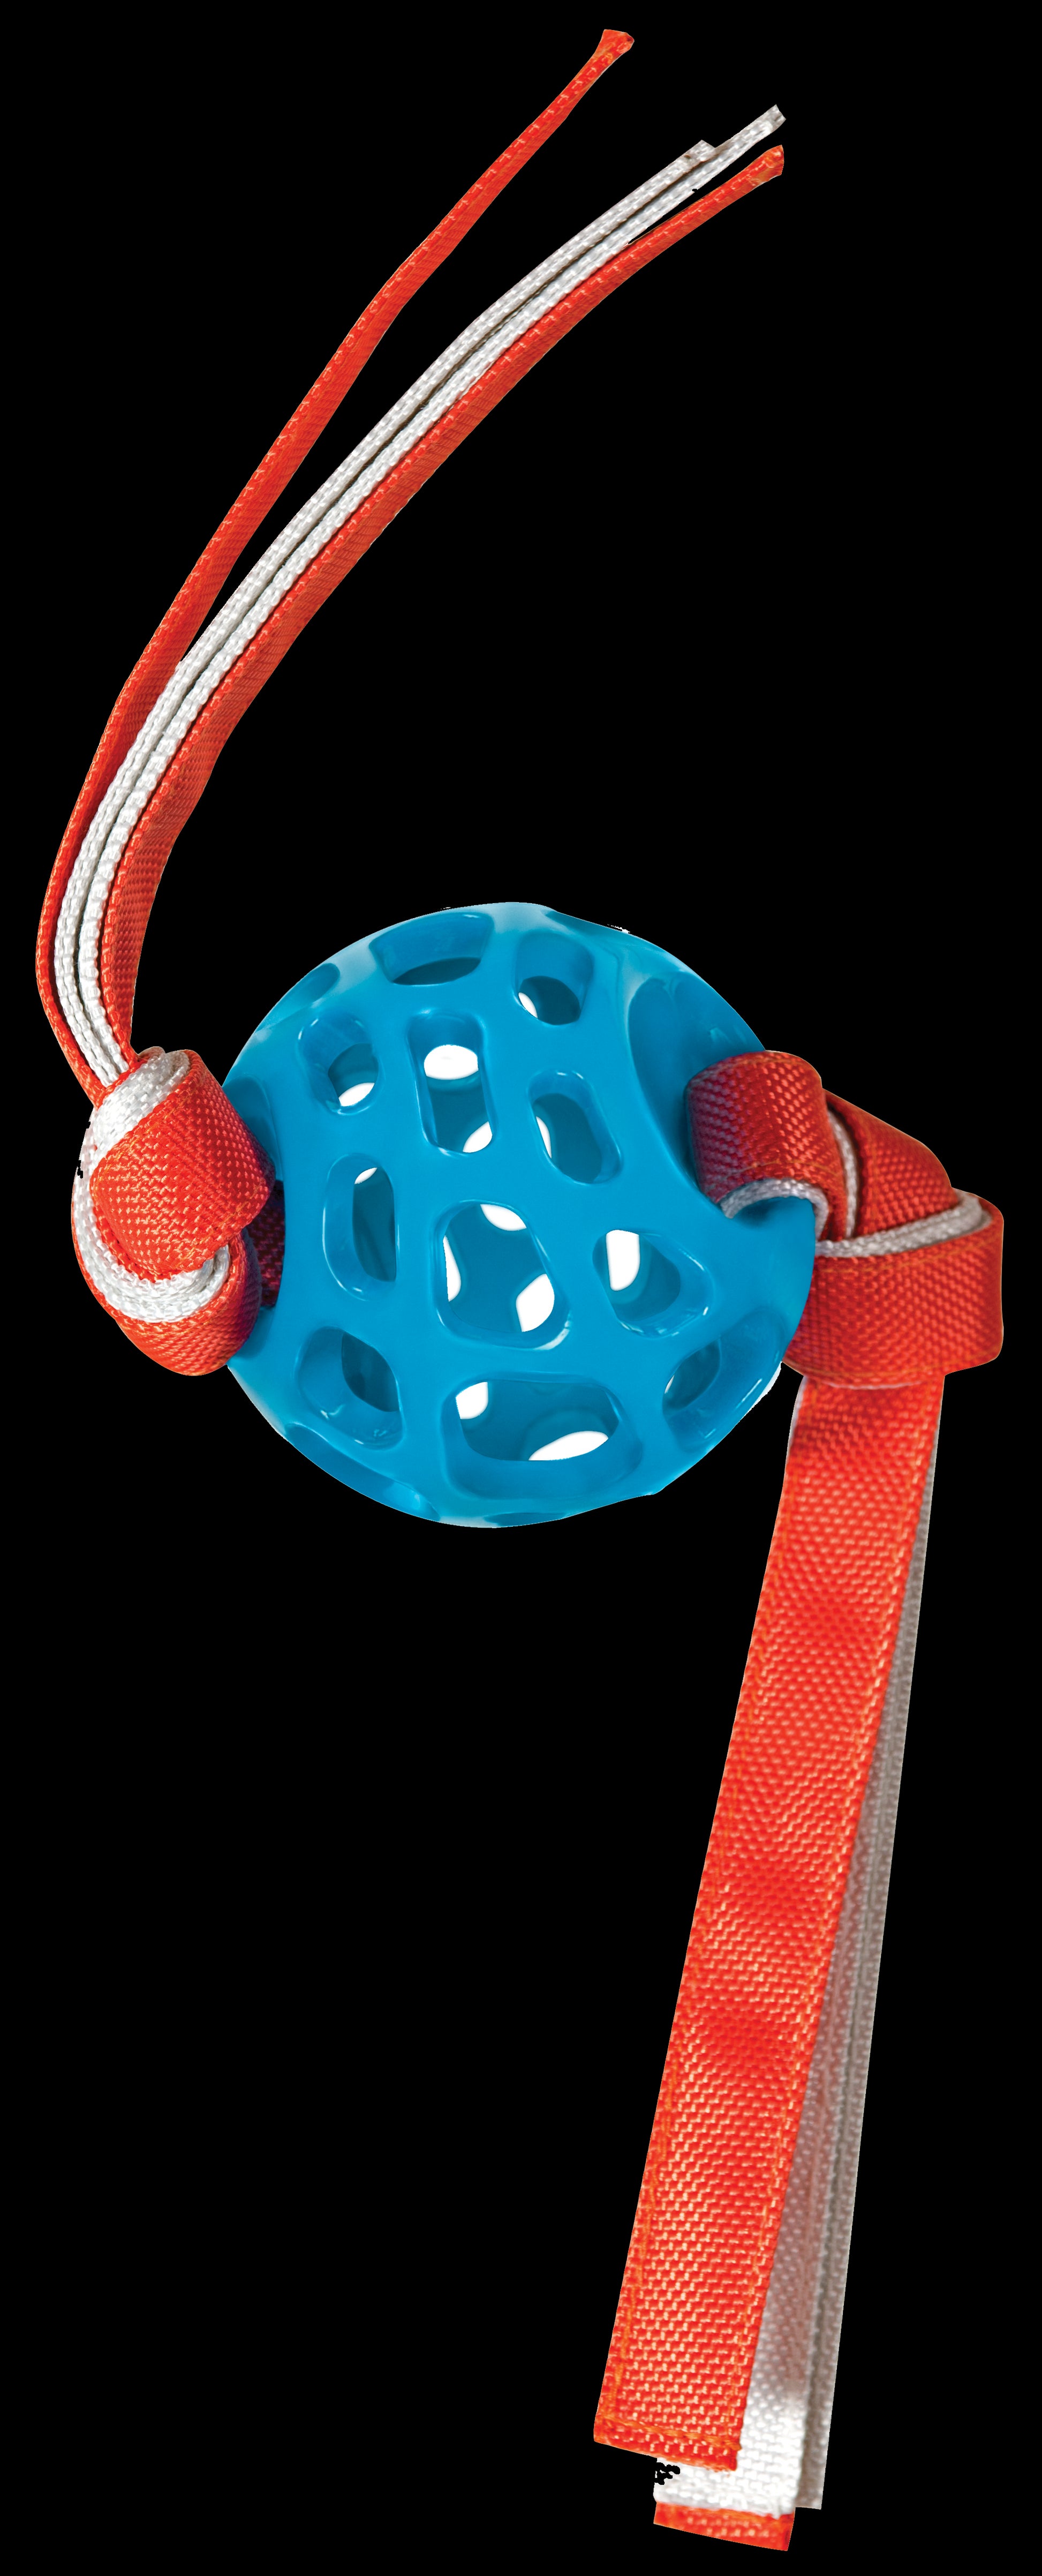 Hero Action treat ball with canvas tassels for dogs